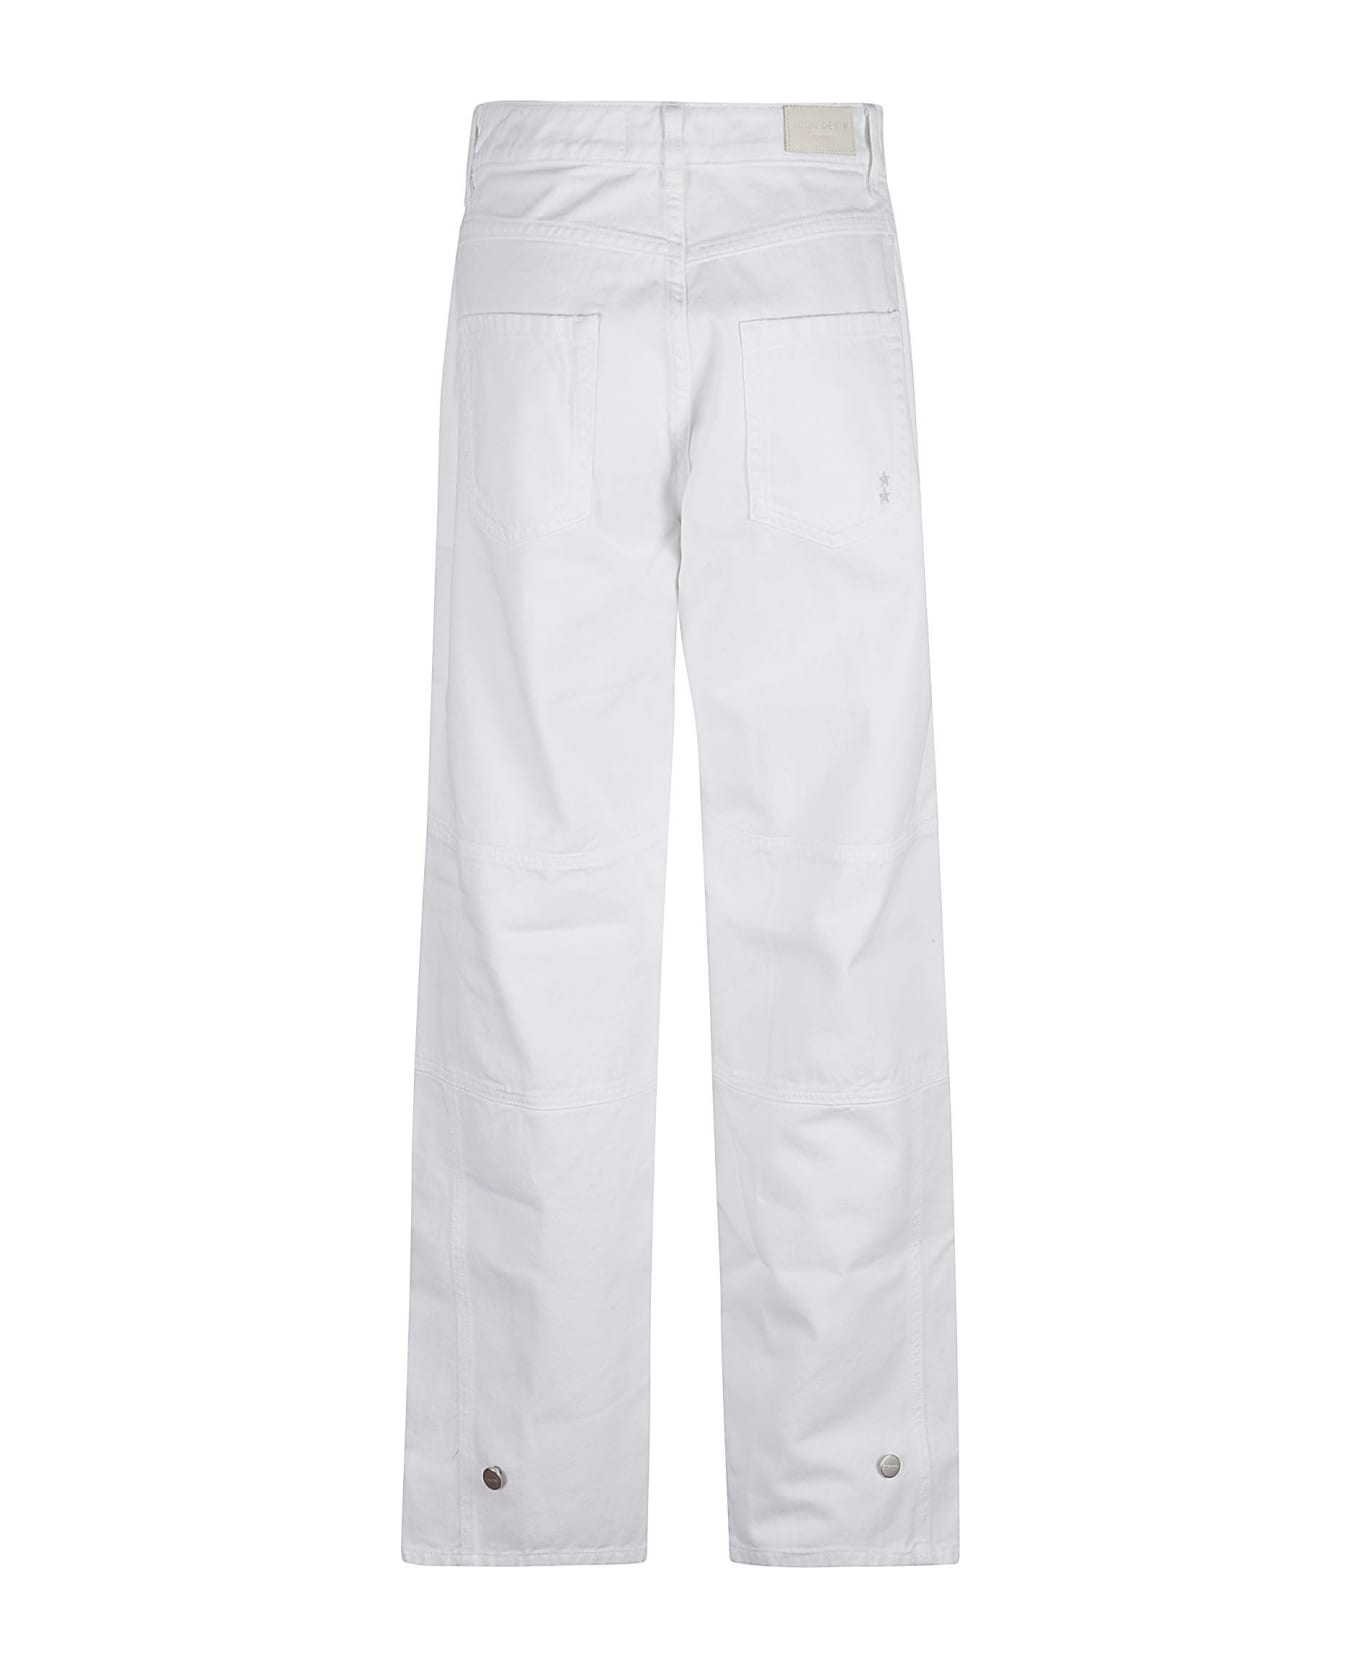 Icon Denim Lucy Trousers - White